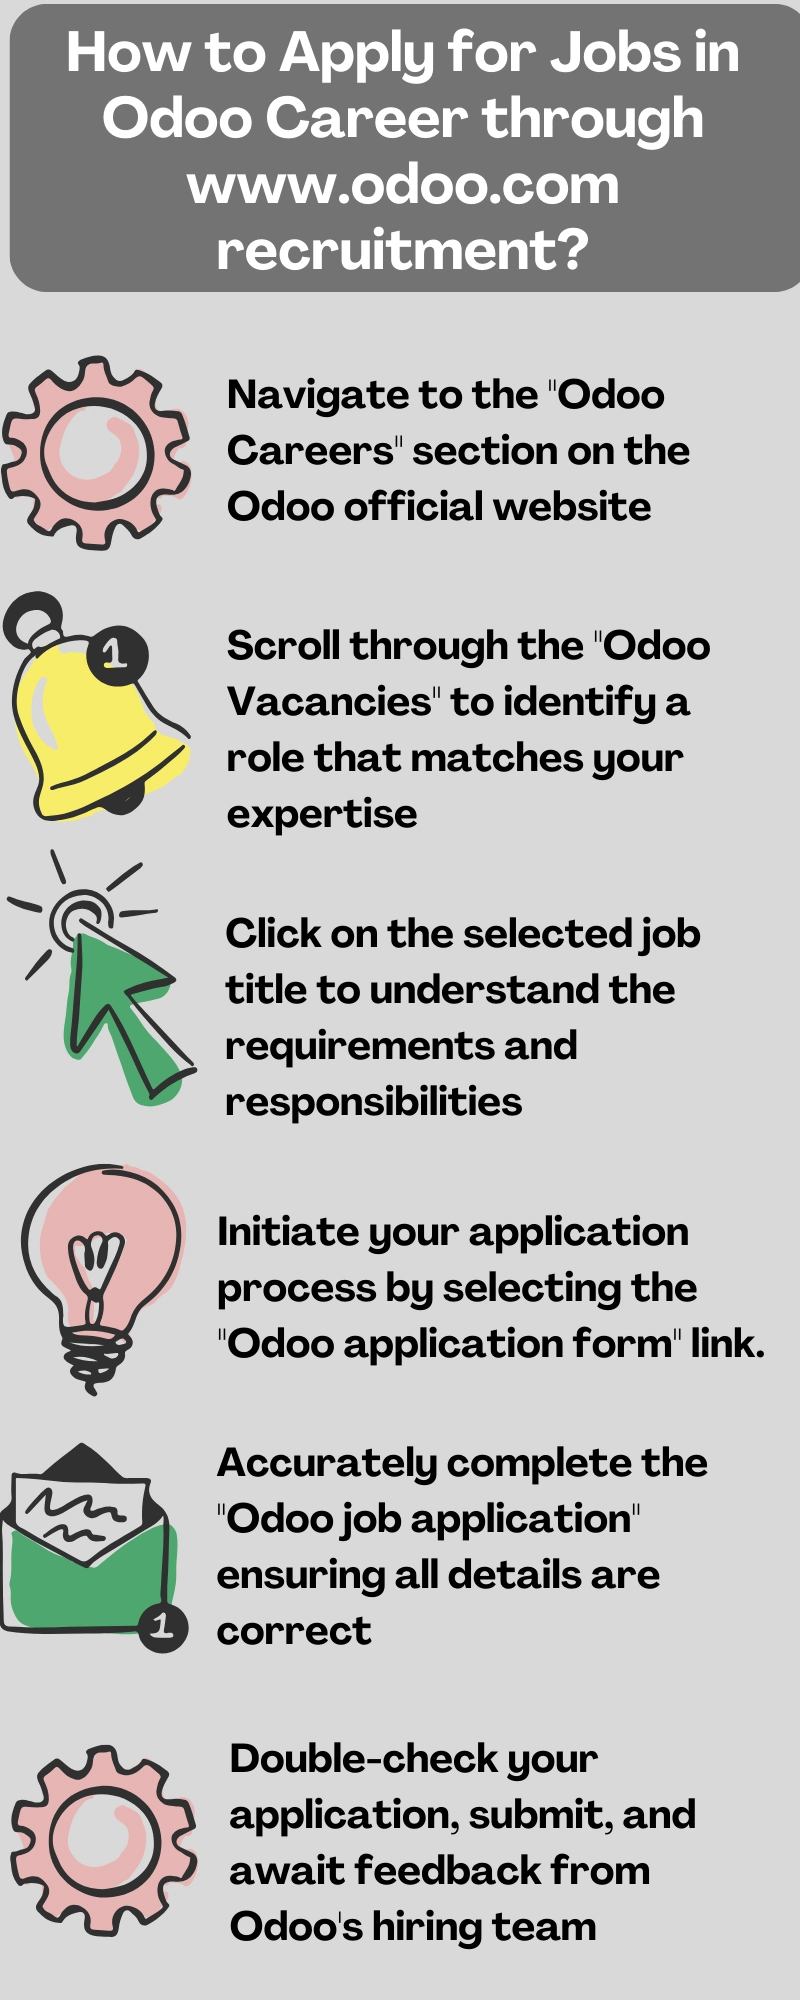 How to Apply for Jobs in Odoo Career through www.odoo.com recruitment?